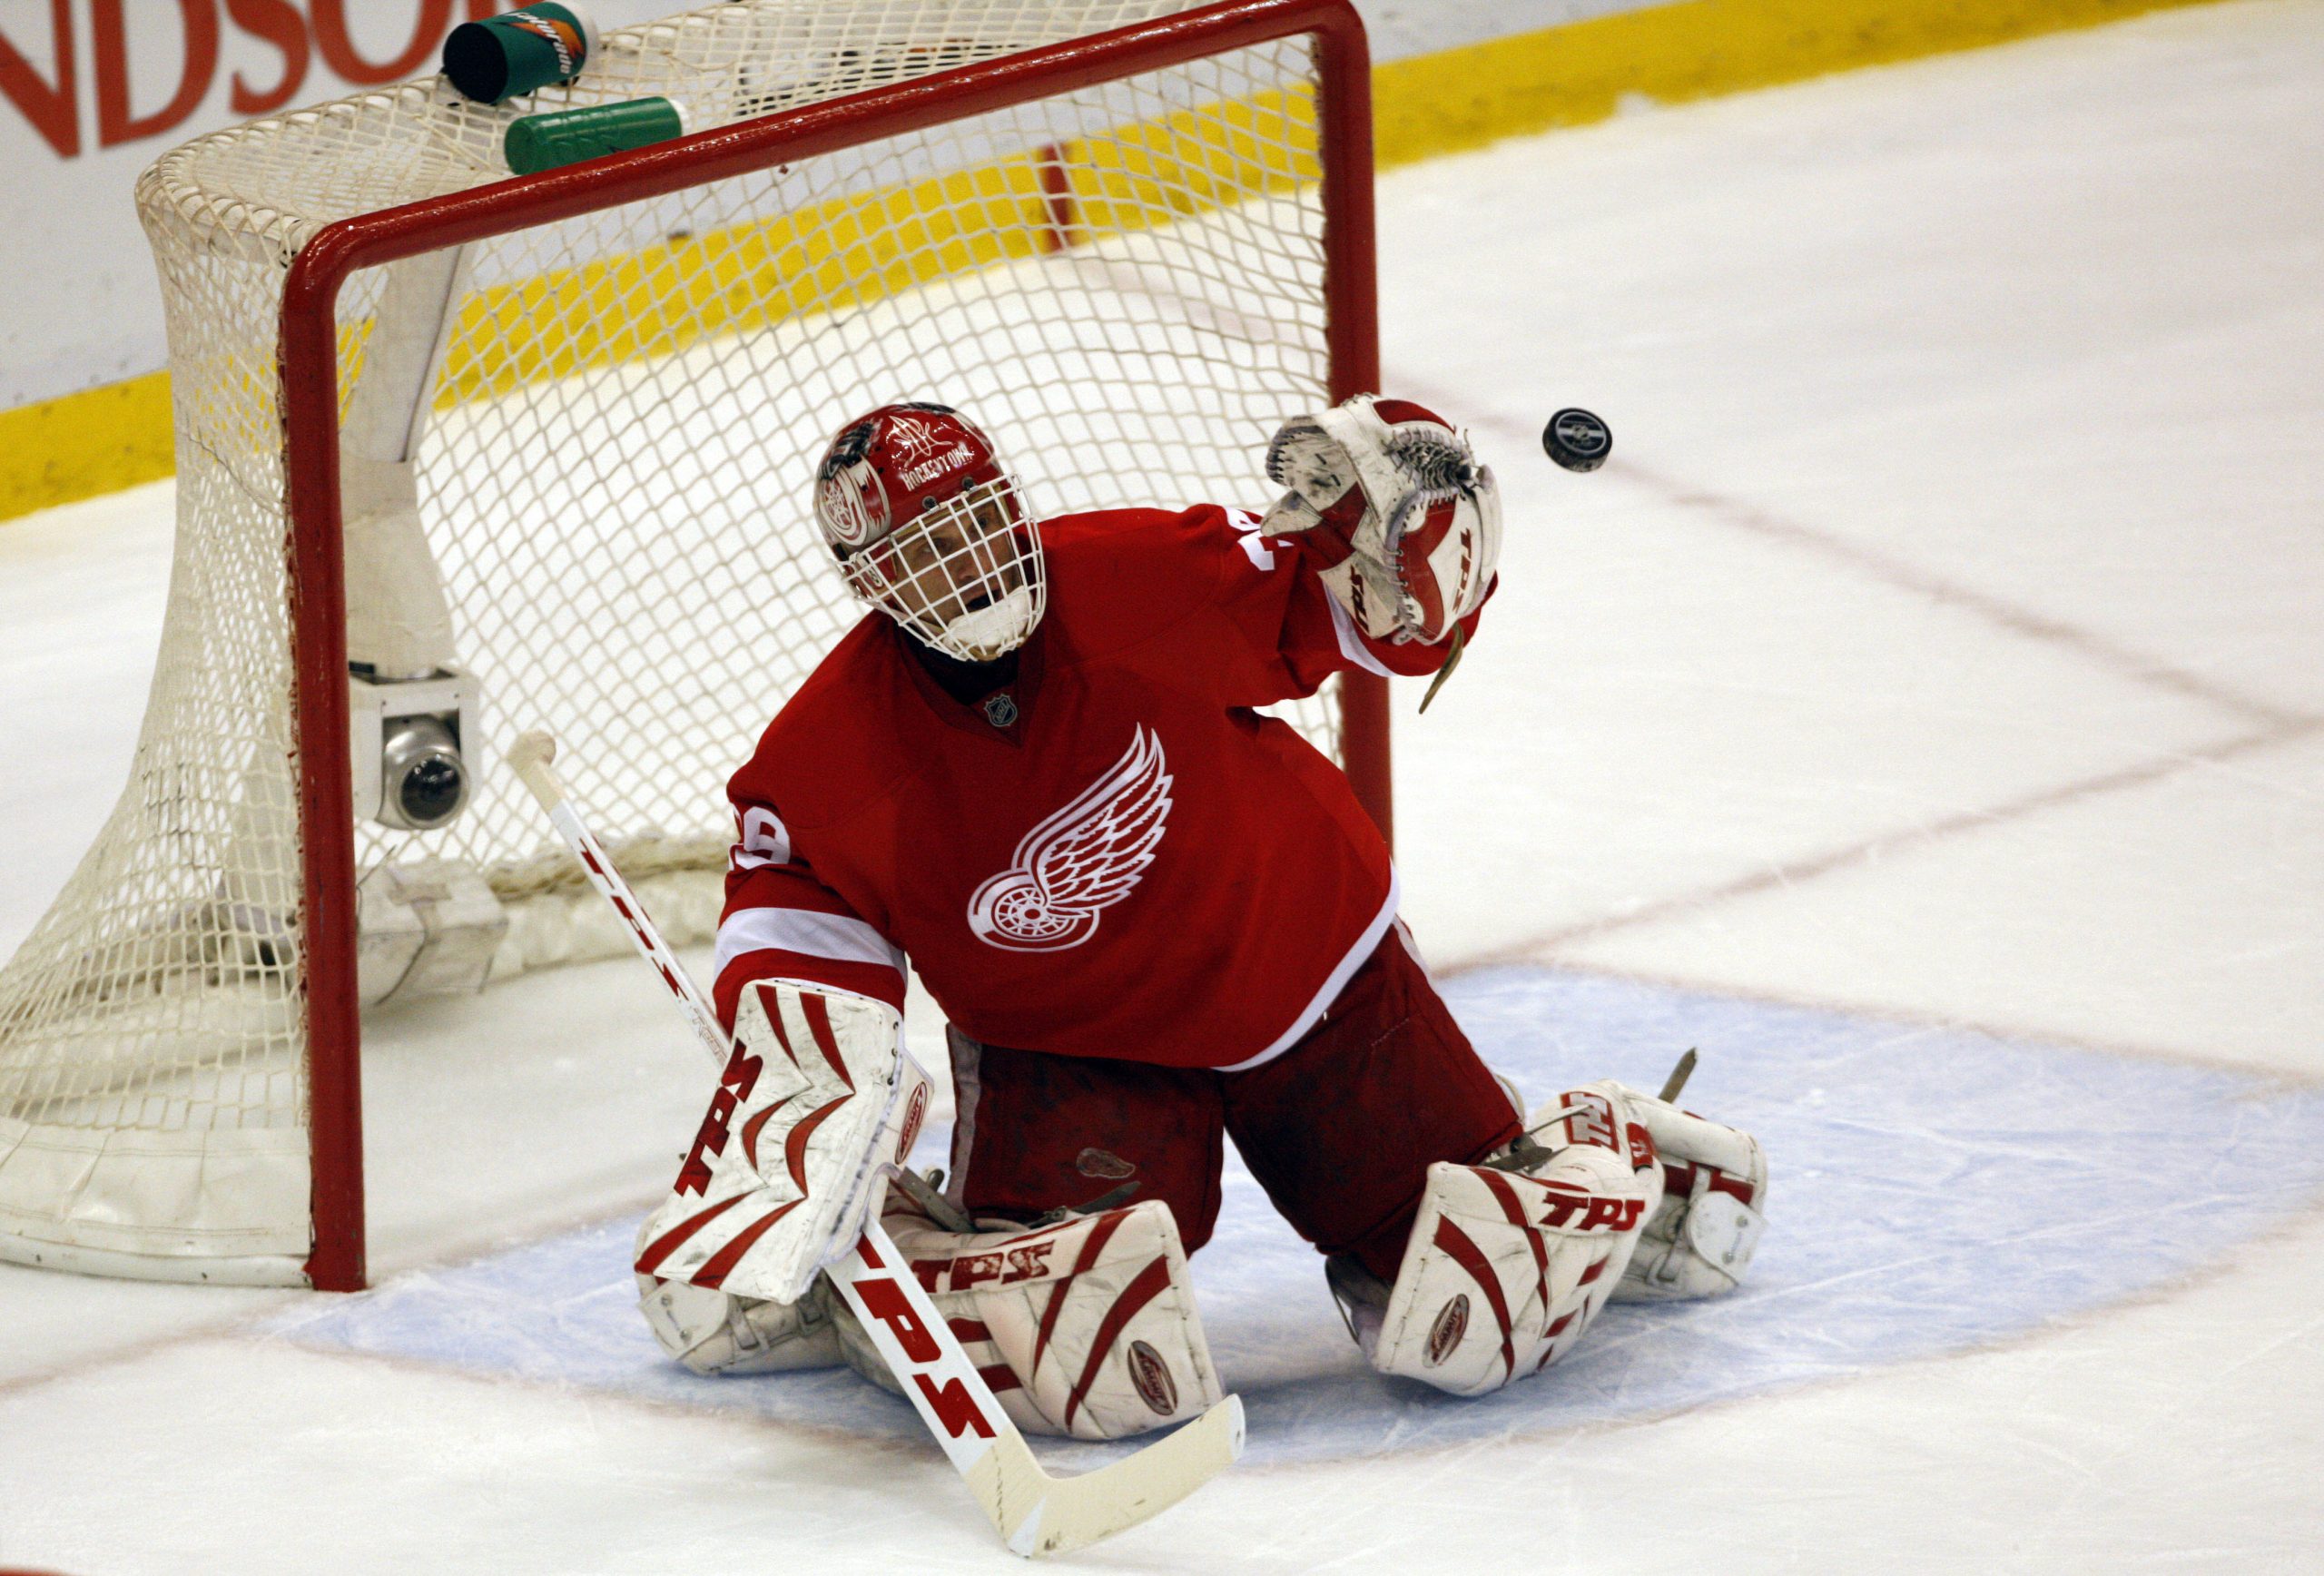 Dominik Hasek is widely regarded as one of the finest goalies in NHL history.